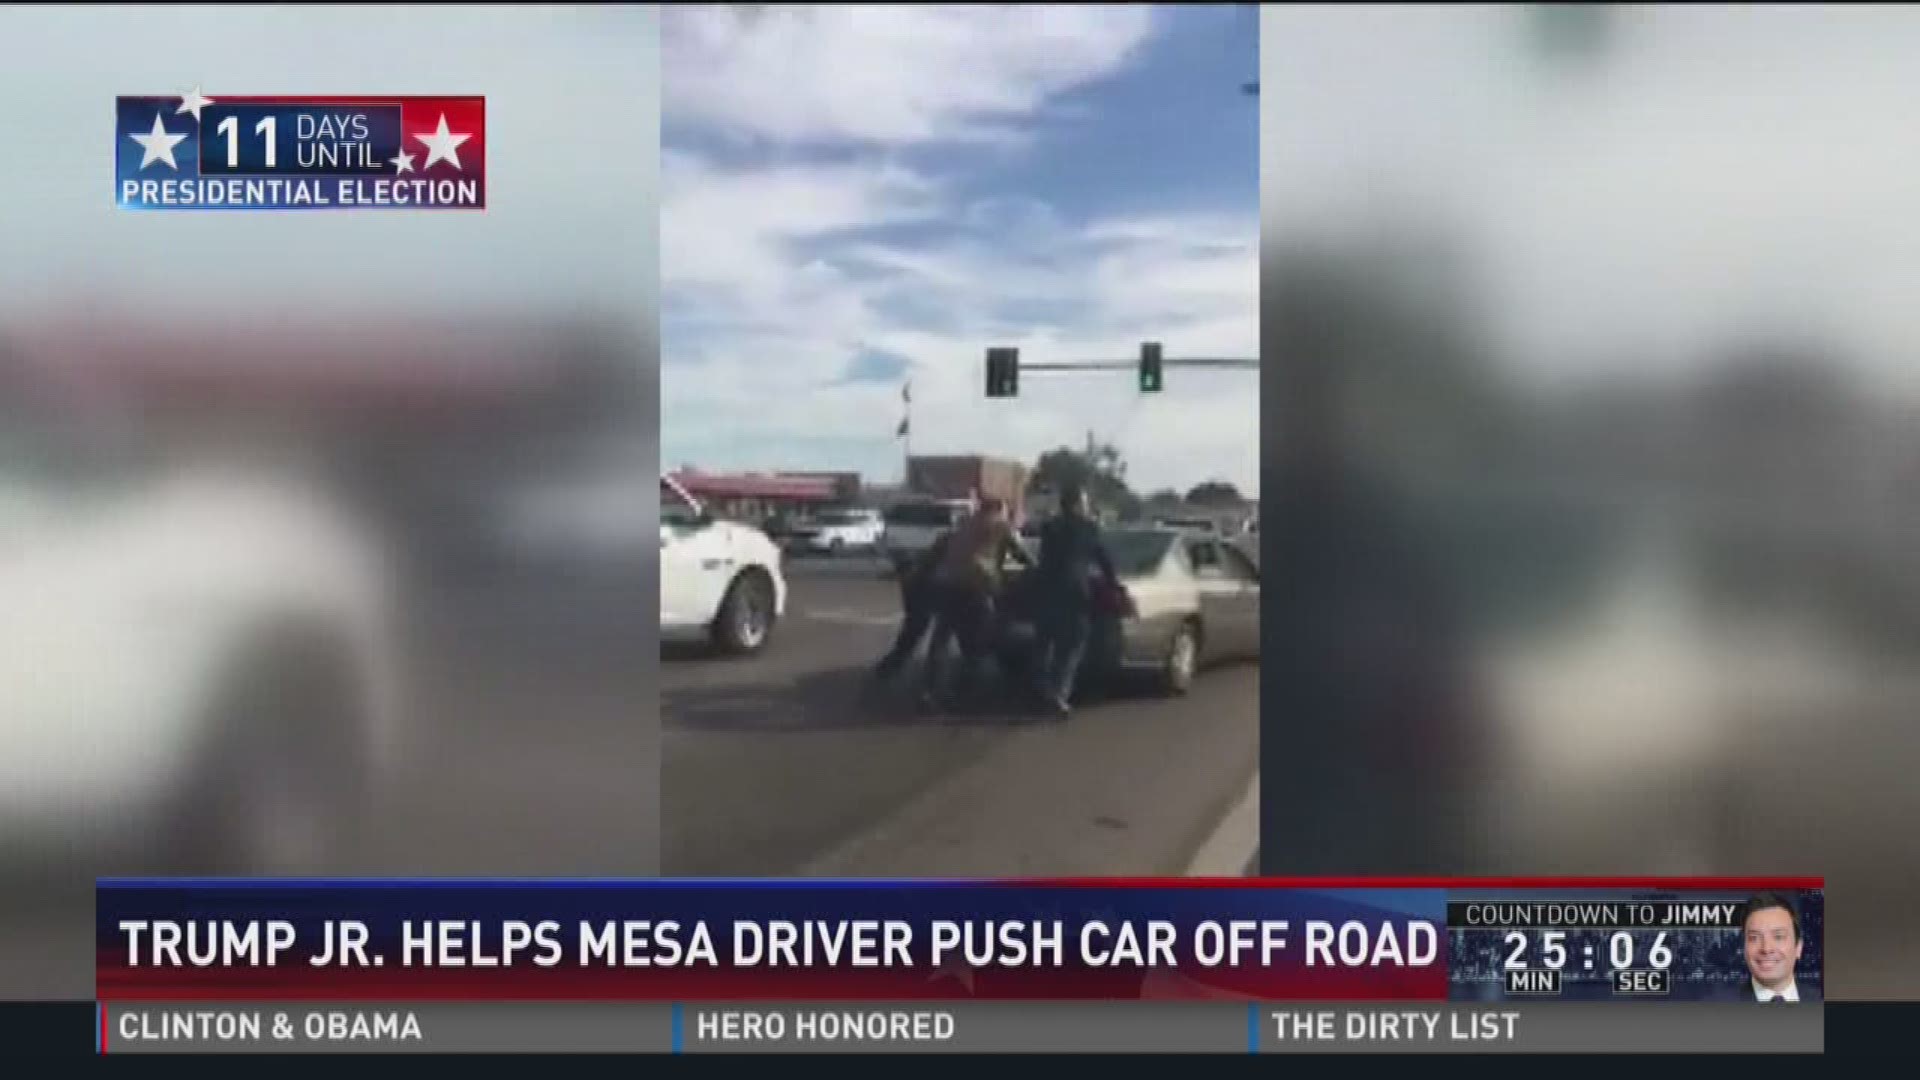 Donald Trump Jr. helped a Mesa driver push their car in between campaign events.